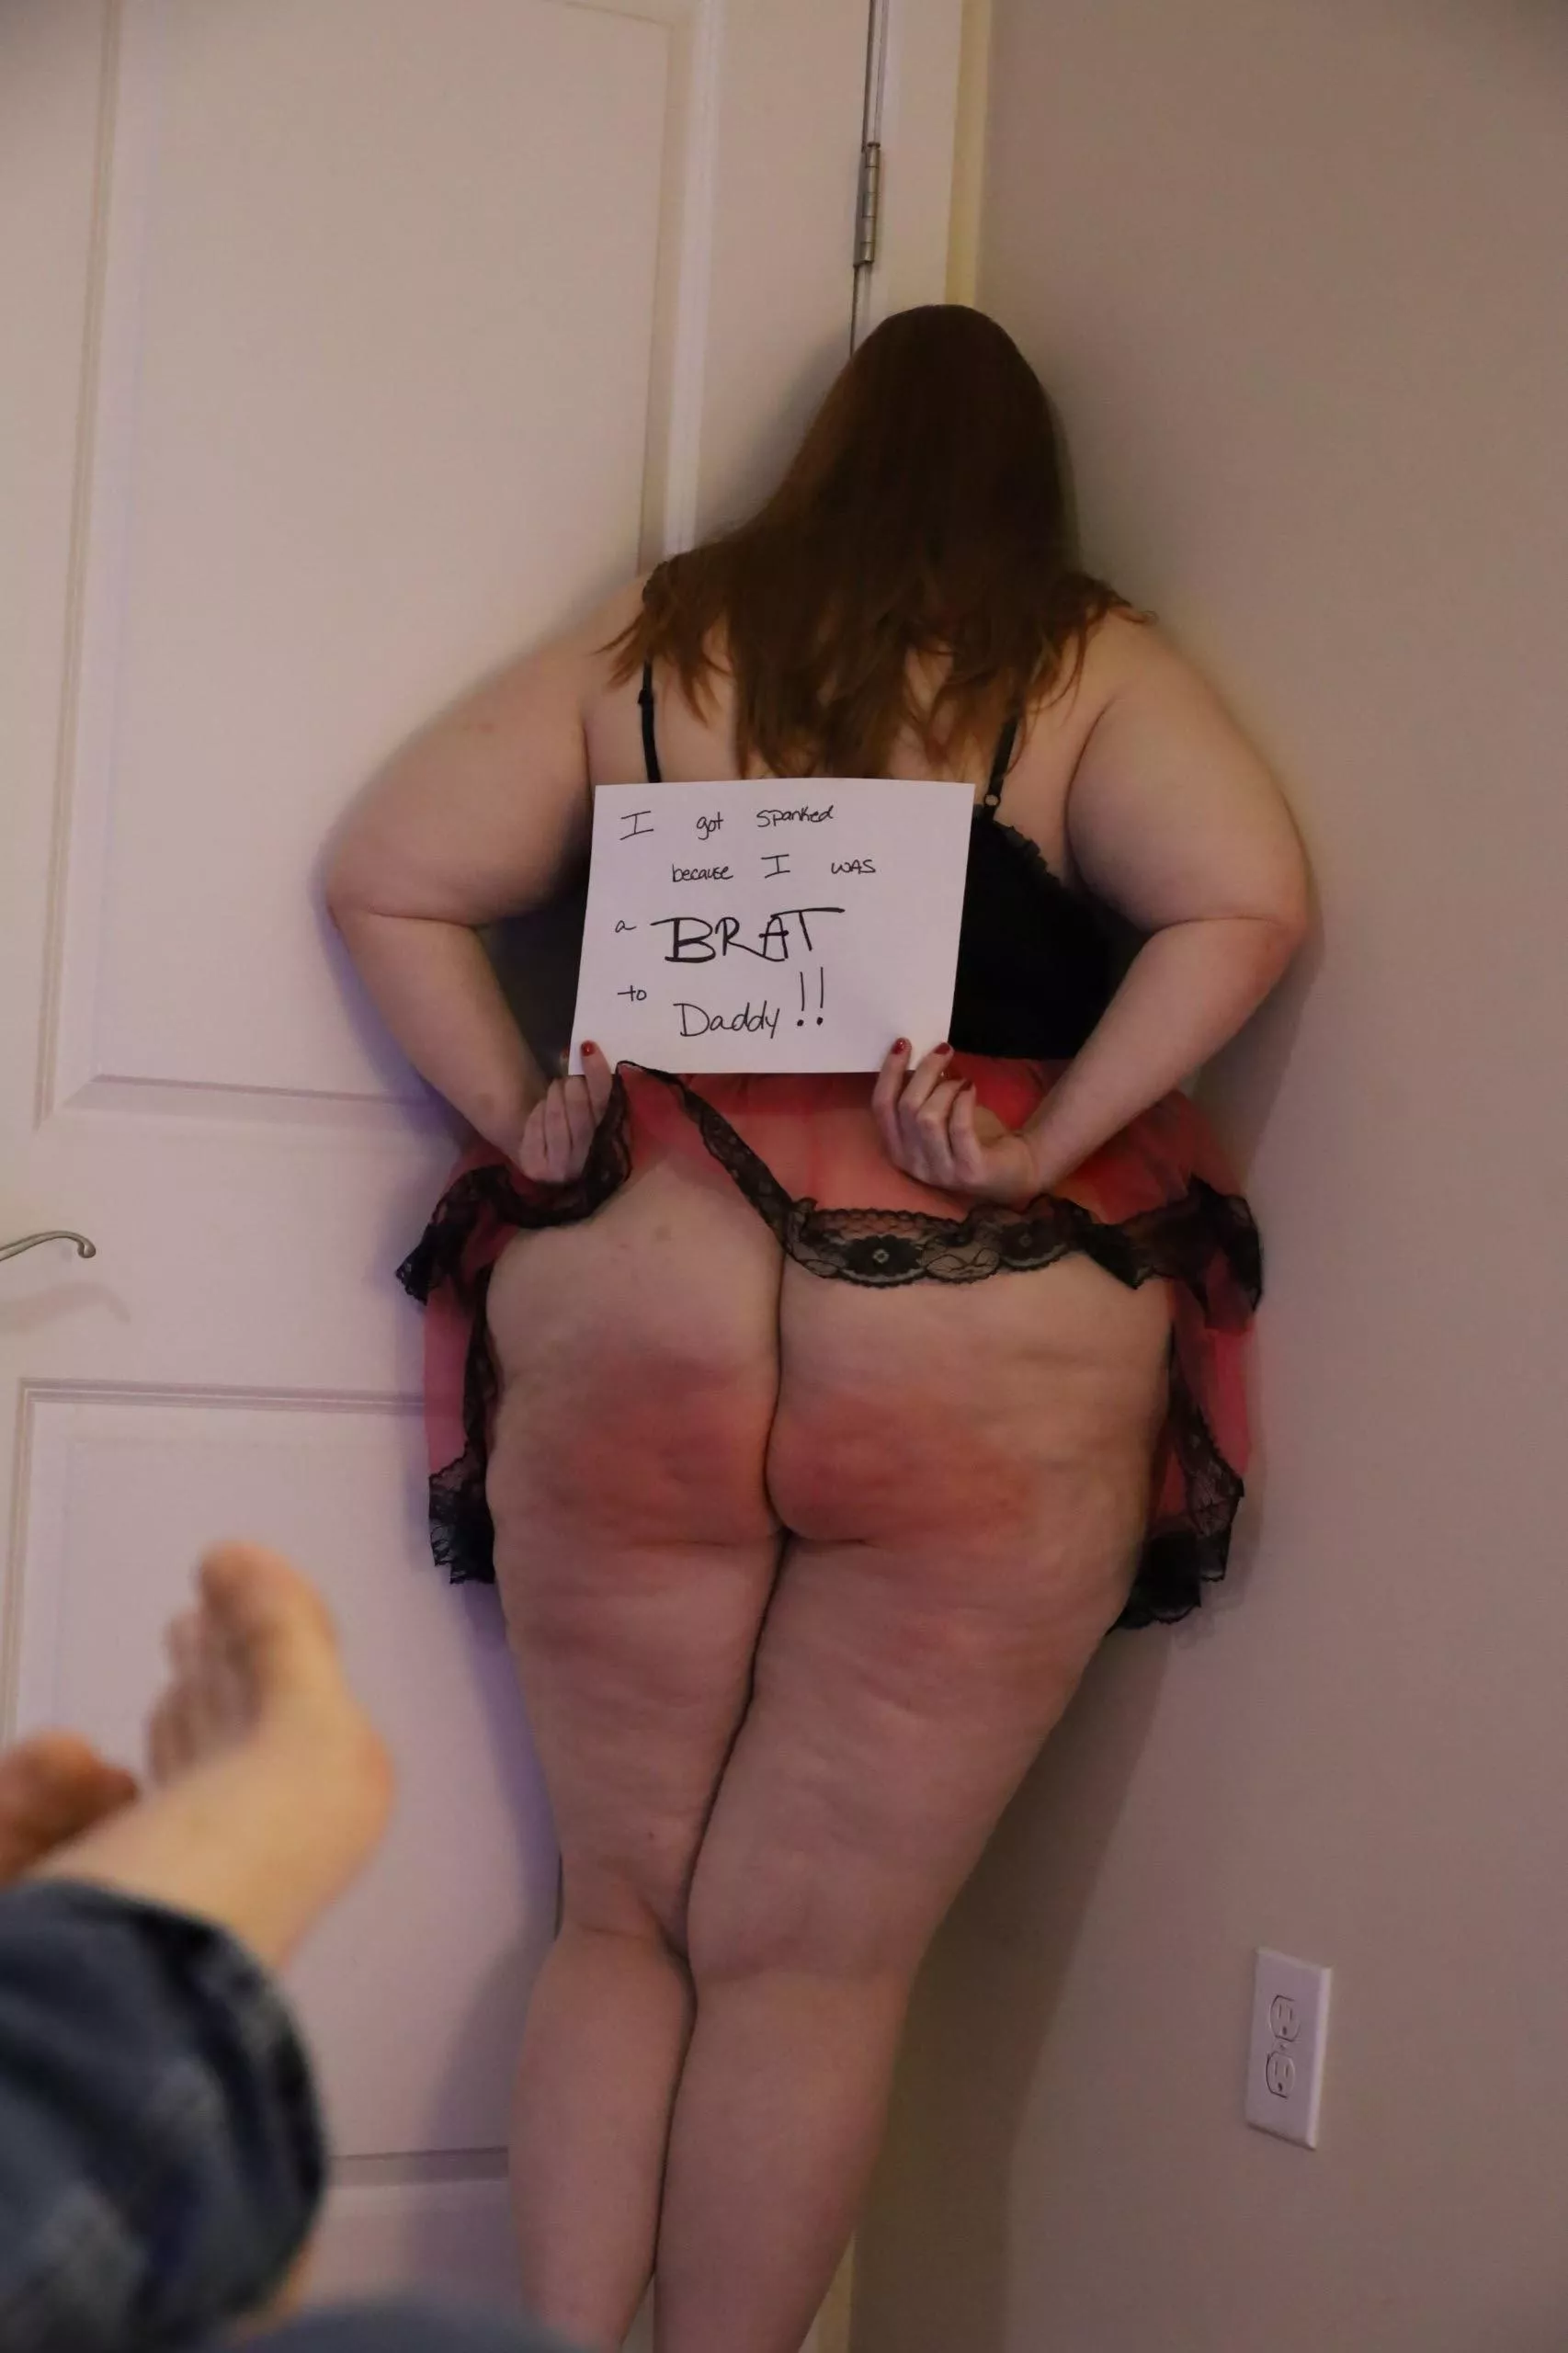 Punished Brats Spanked In Panties - Domestic discipline brat got punished nudes in Spanking | Onlynudes.org